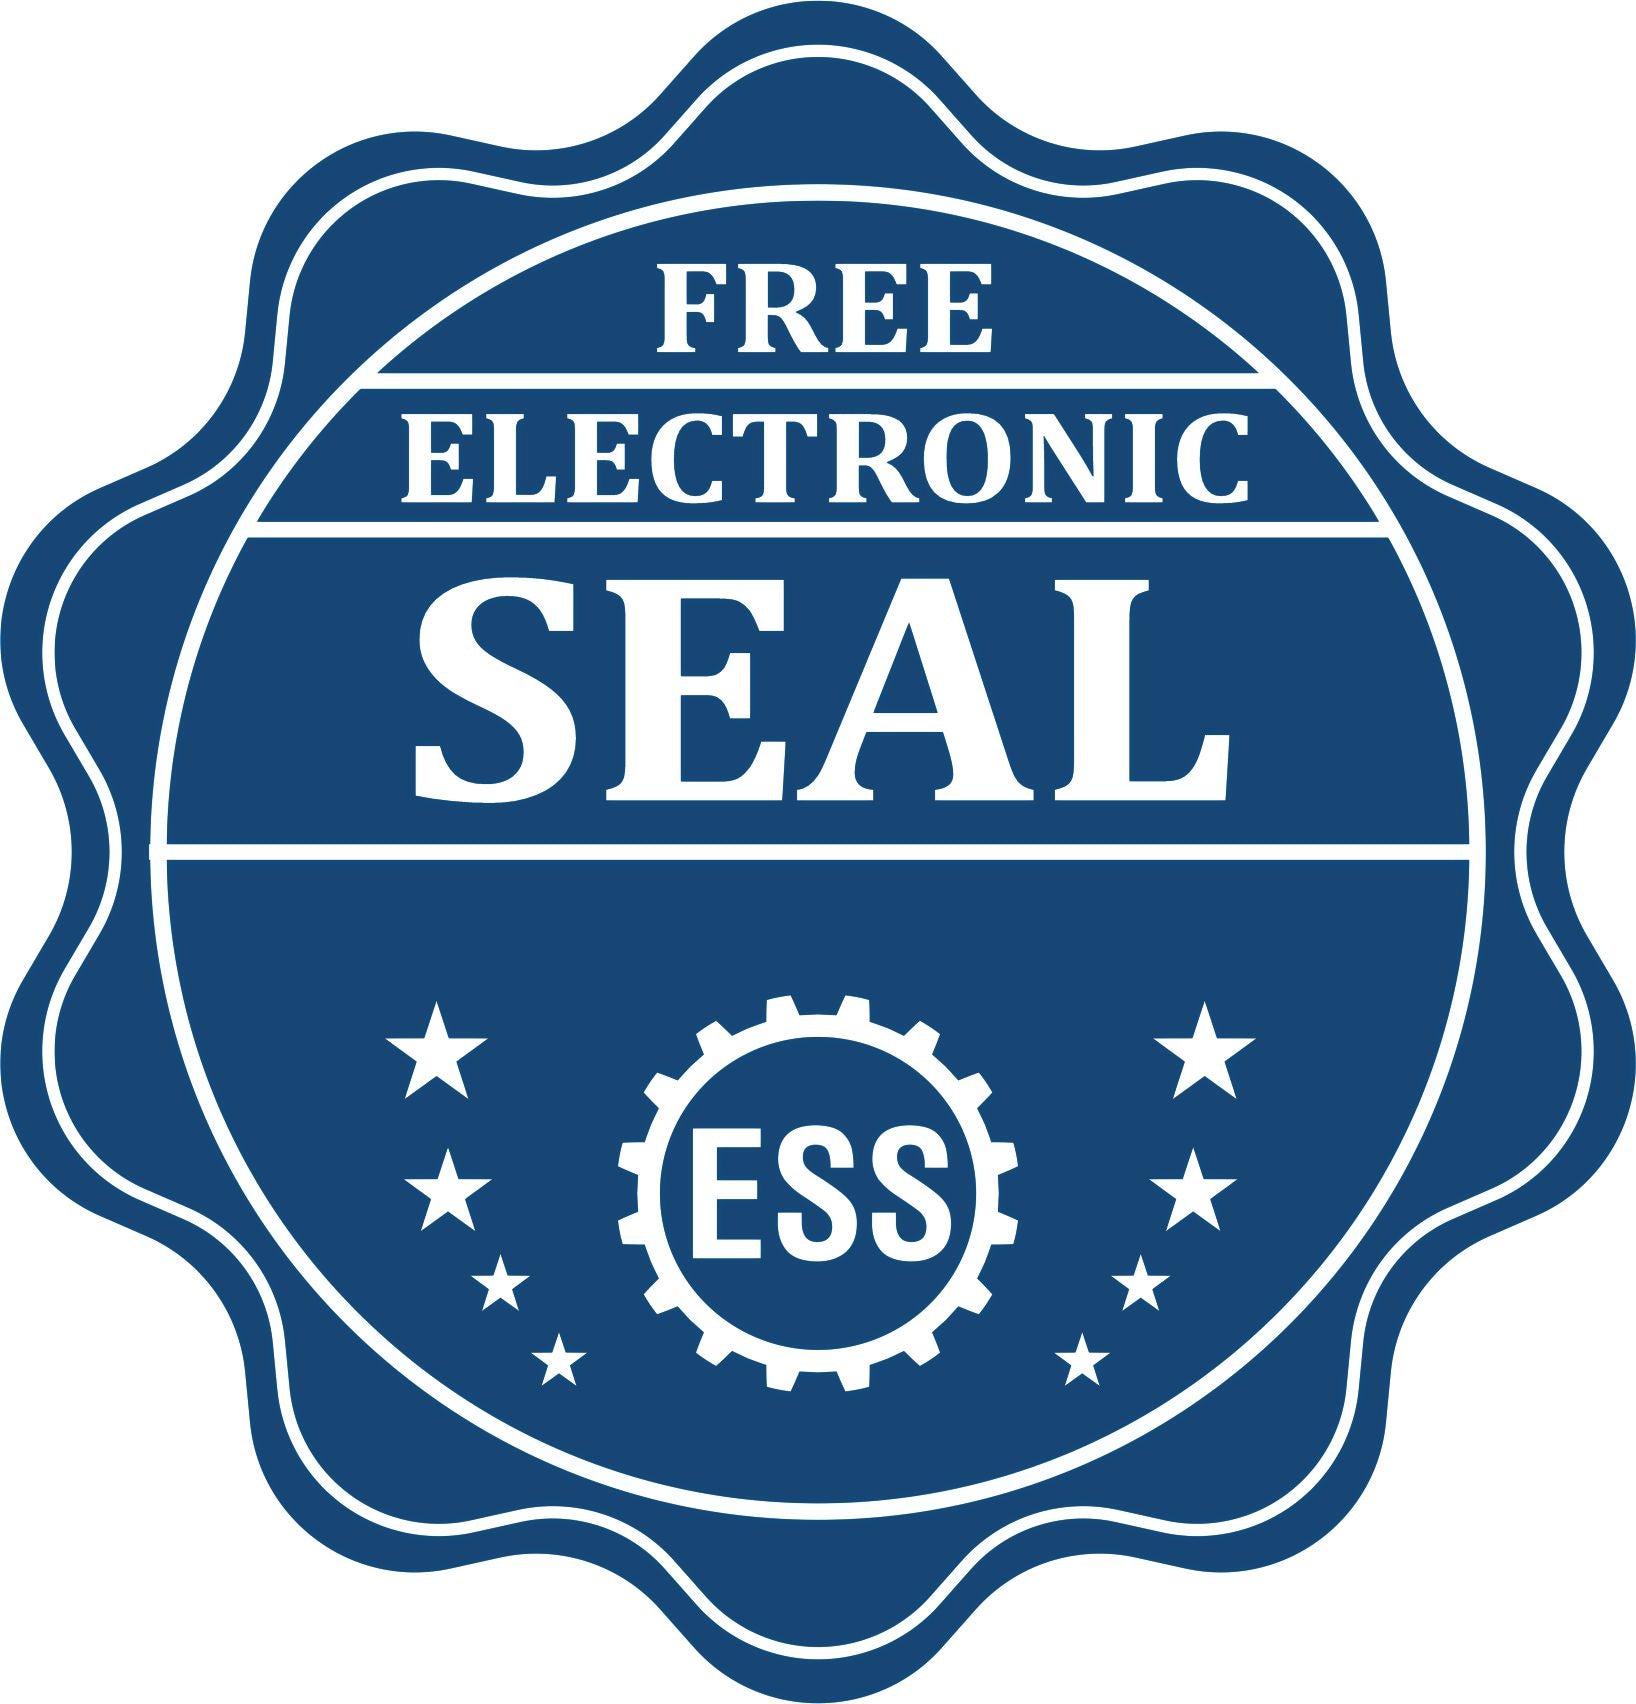 A badge showing a free electronic seal for the Georgia Desk Architect Embossing Seal with stars and the ESS gear on the emblem.